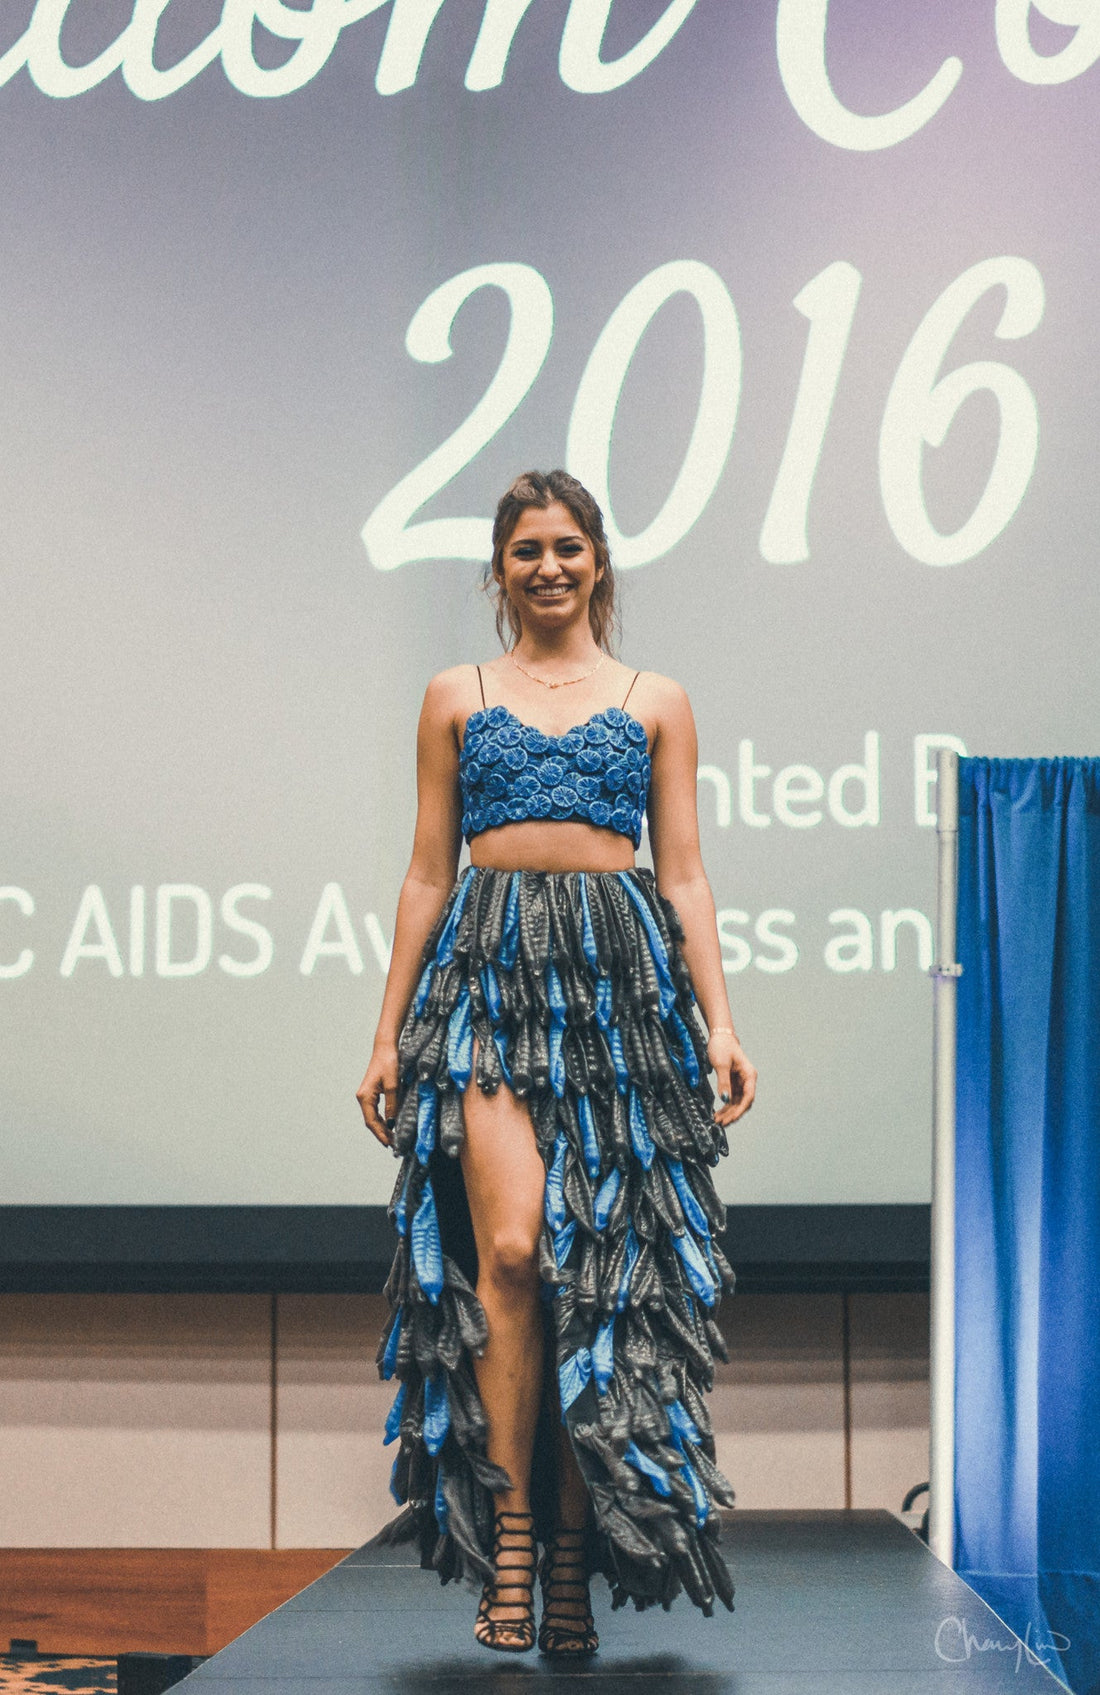 UCLA's Student Wellness Commission Project Condom Fashion Show - ONE®